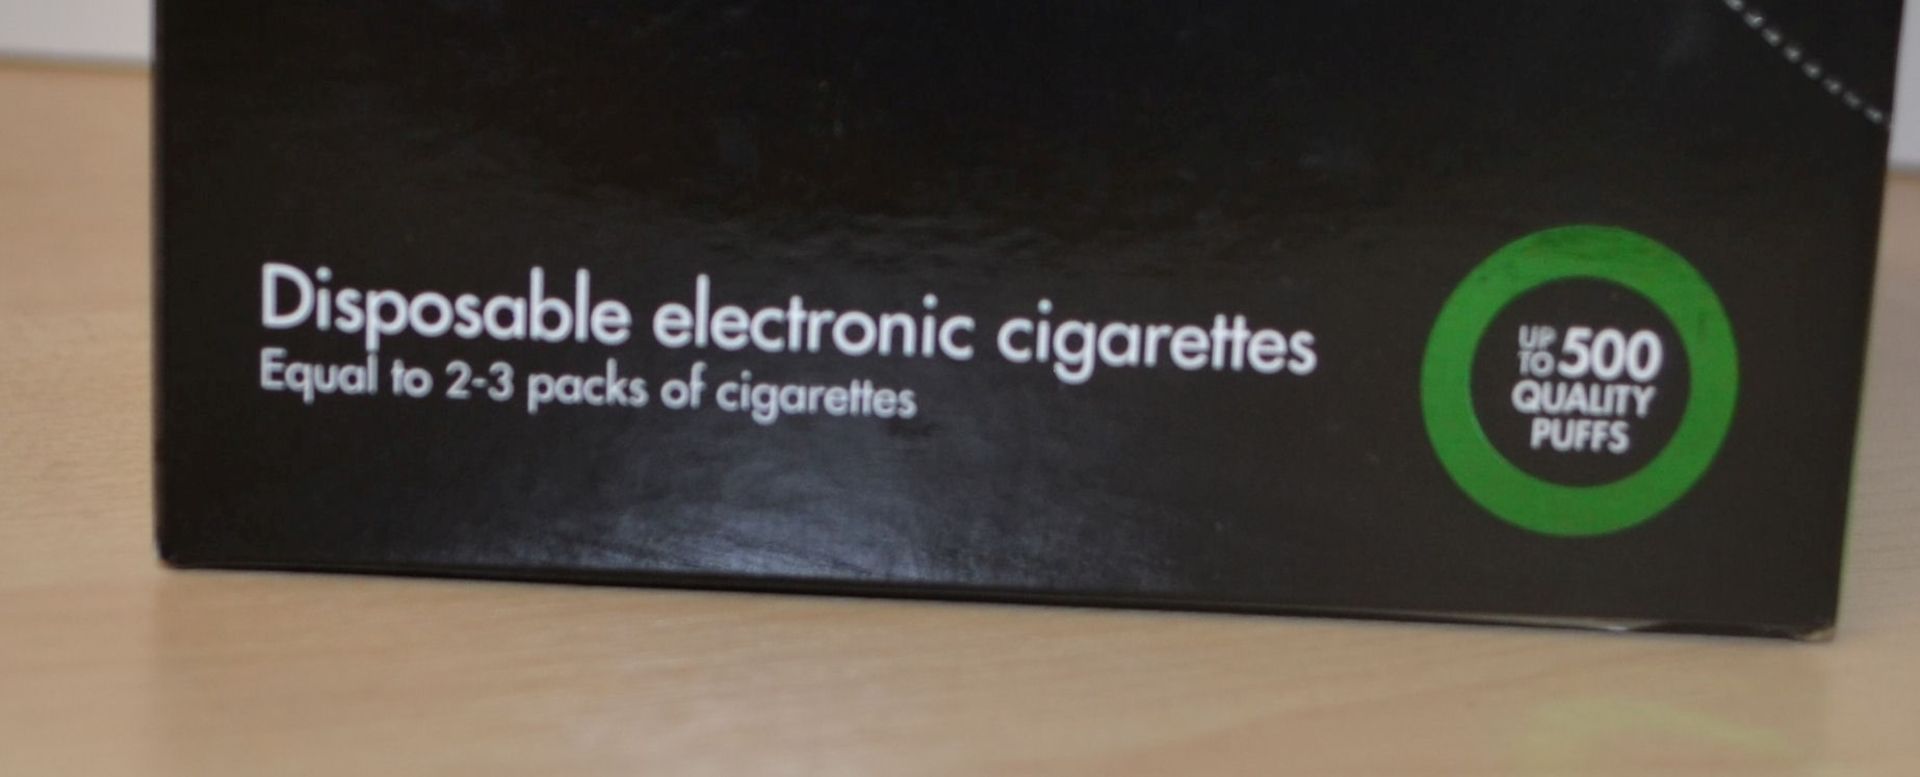 60 x Neo E-Cigarettes Cool Mint Disposable Electronic Cigarettes - New & Sealed Stock - CL185 - Ref: - Image 5 of 13